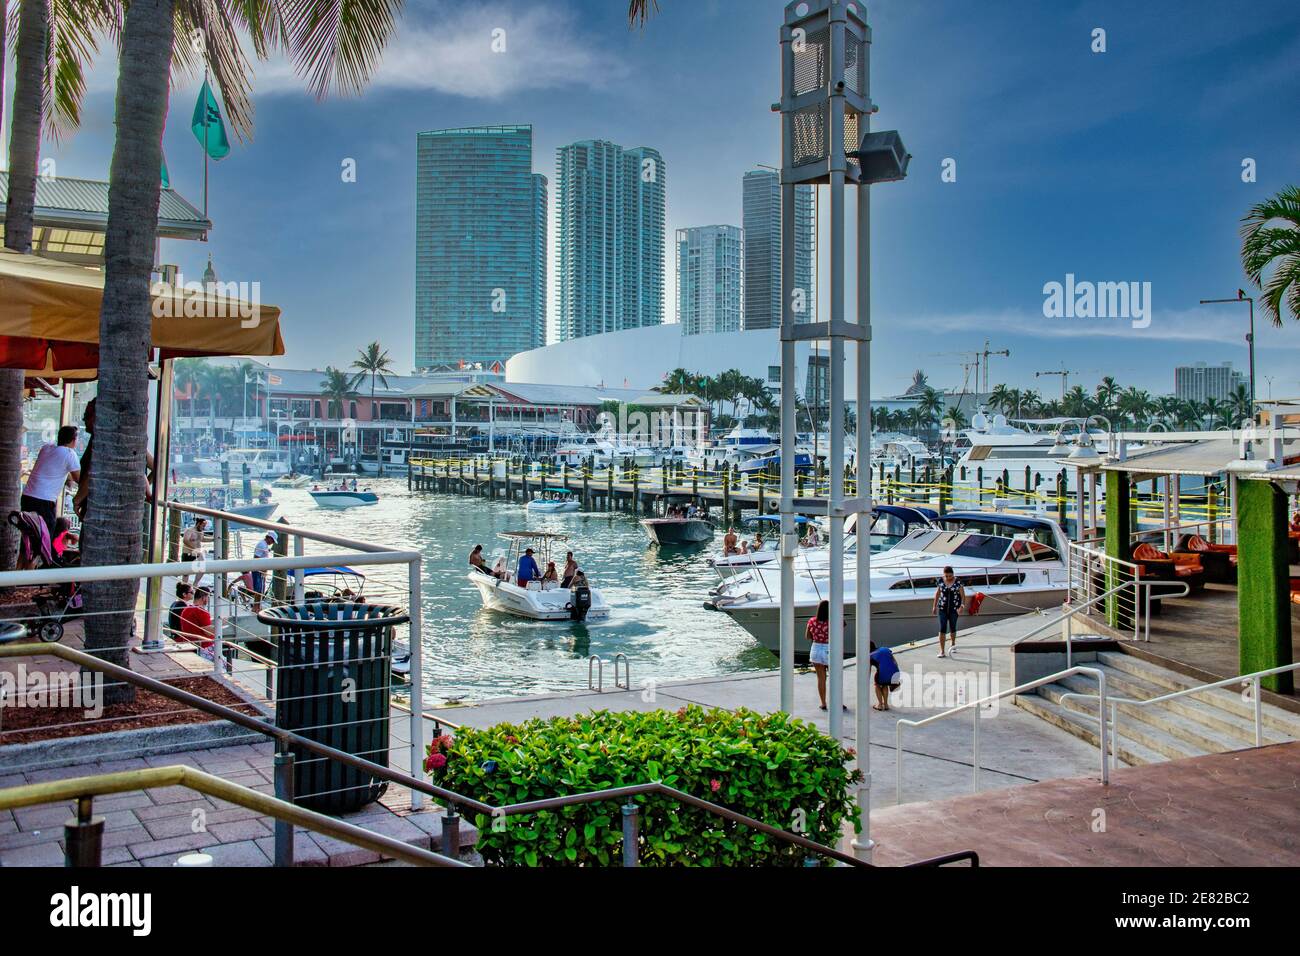 The marina at the Bayfront Marketplace located on Biscayne Bay in Miami, Florida. Stock Photo